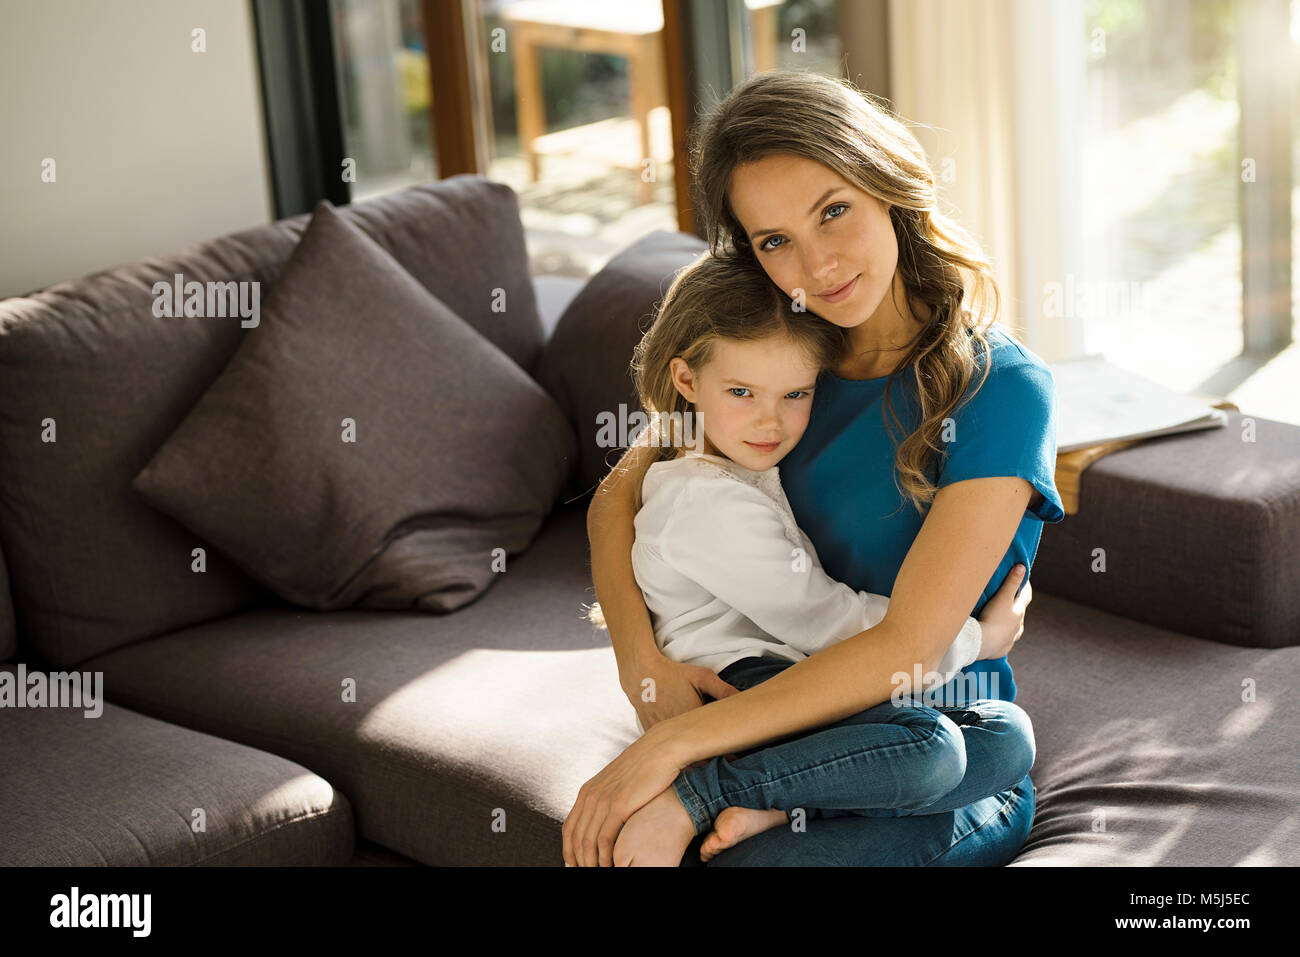 Portrait of smiling mother holding her daughter on sofa at home Stock Photo